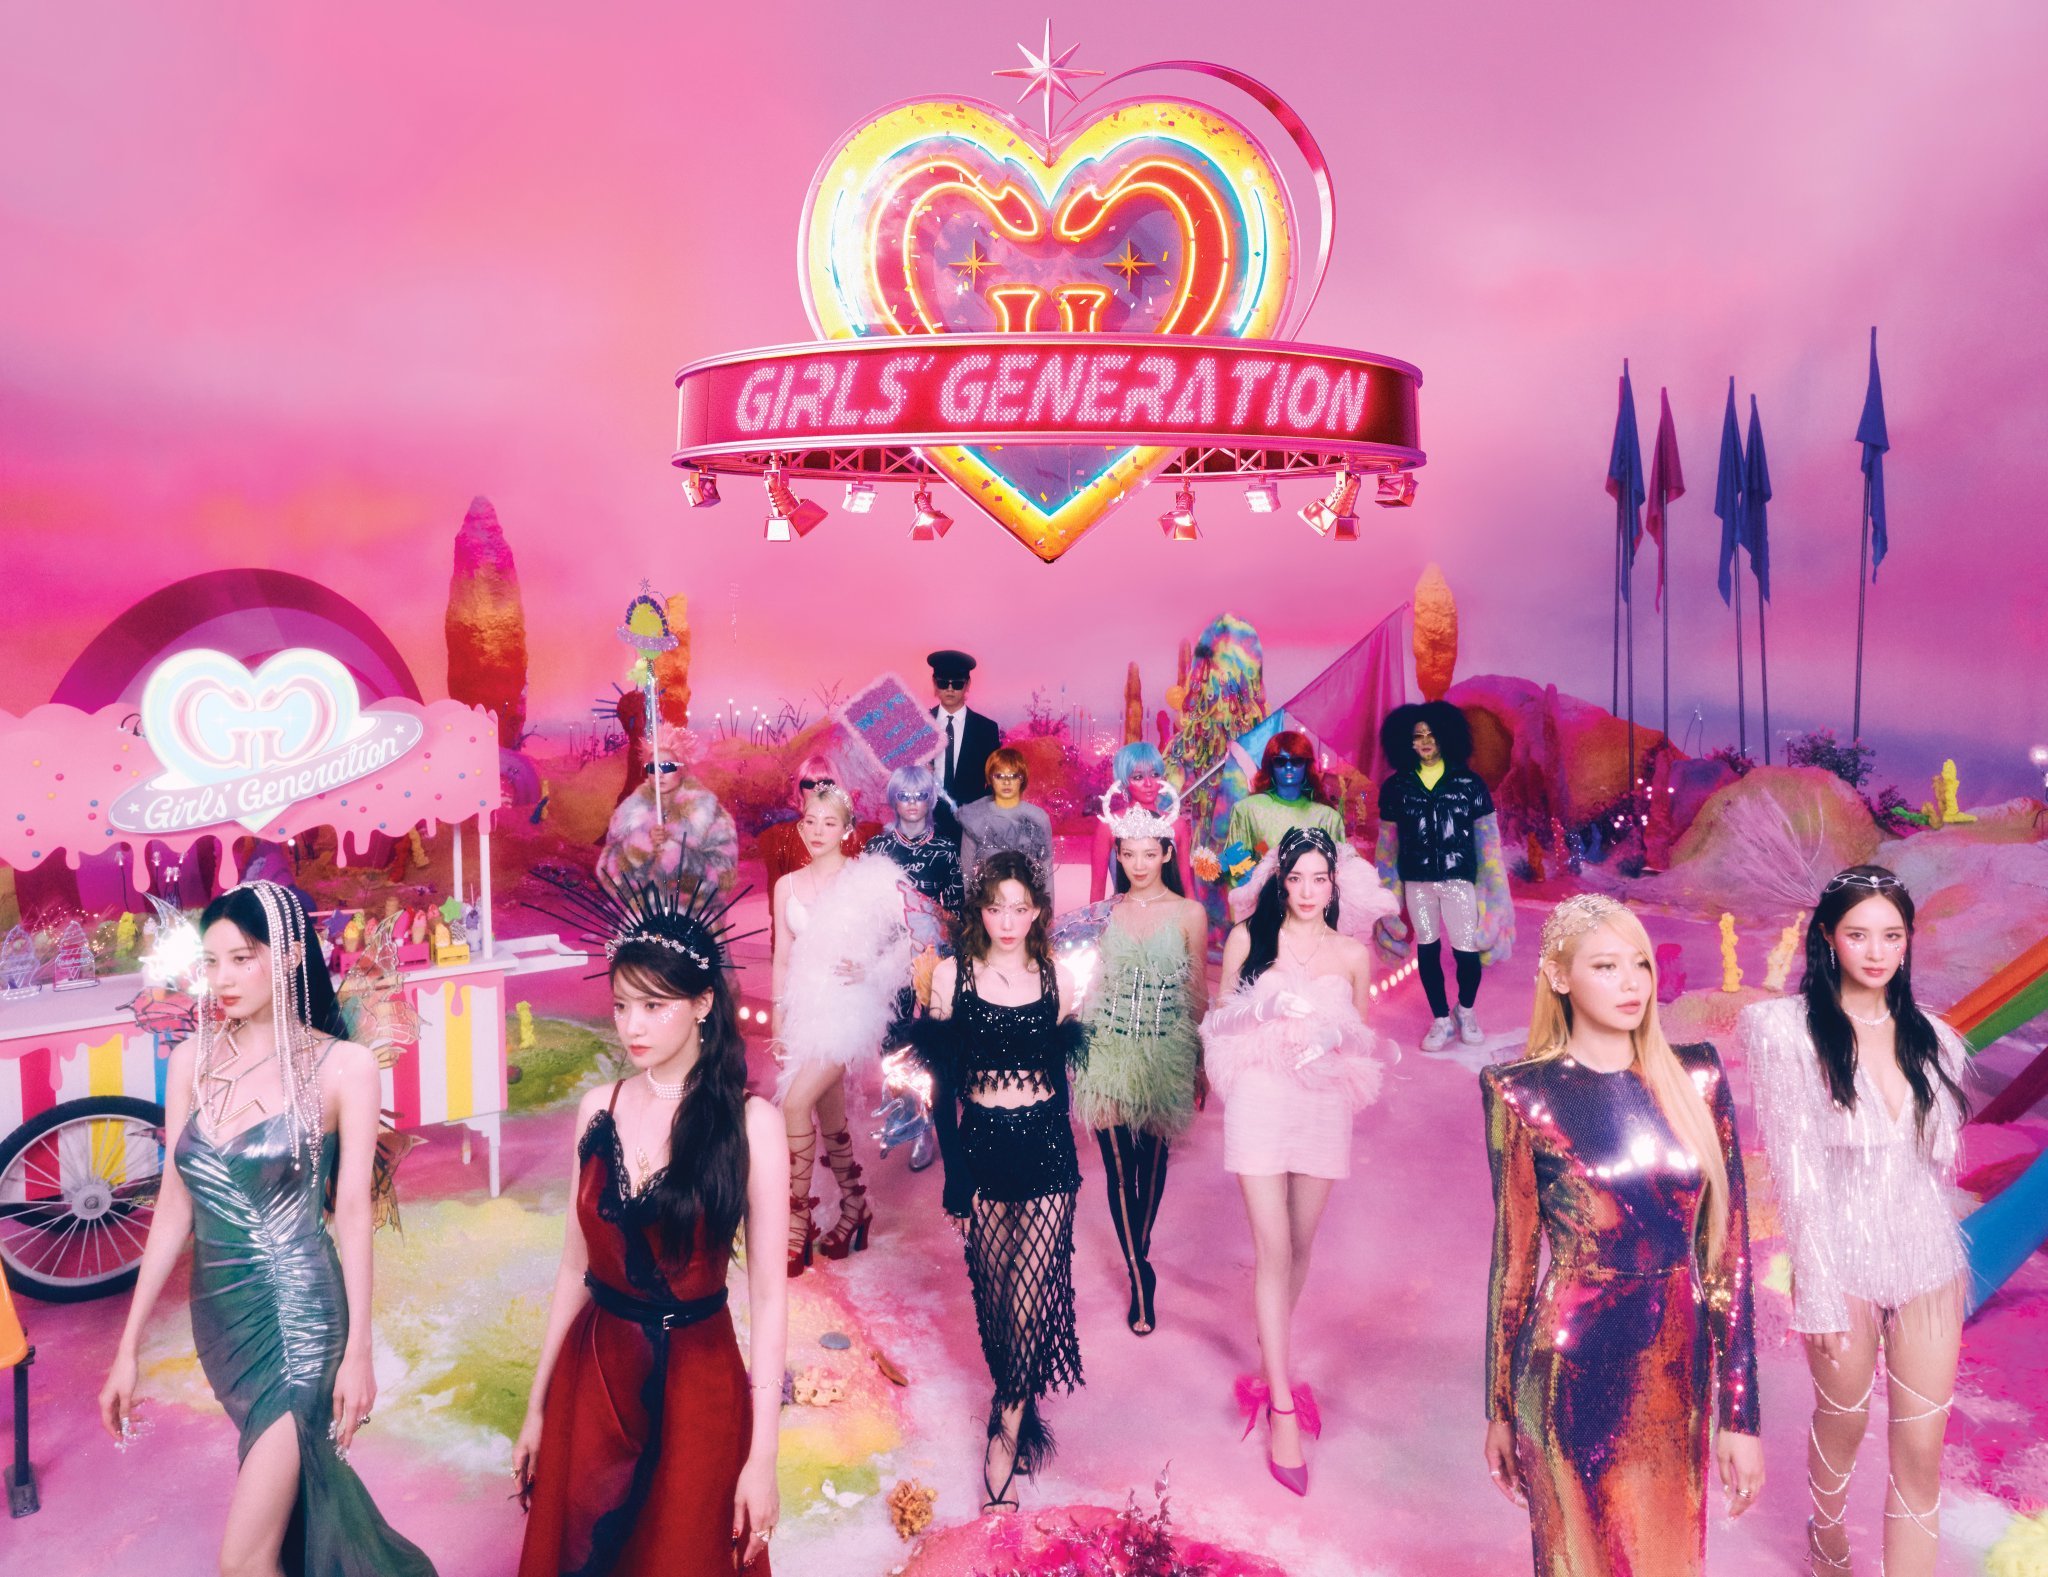 Gee (Girls' Generation song) - Wikipedia